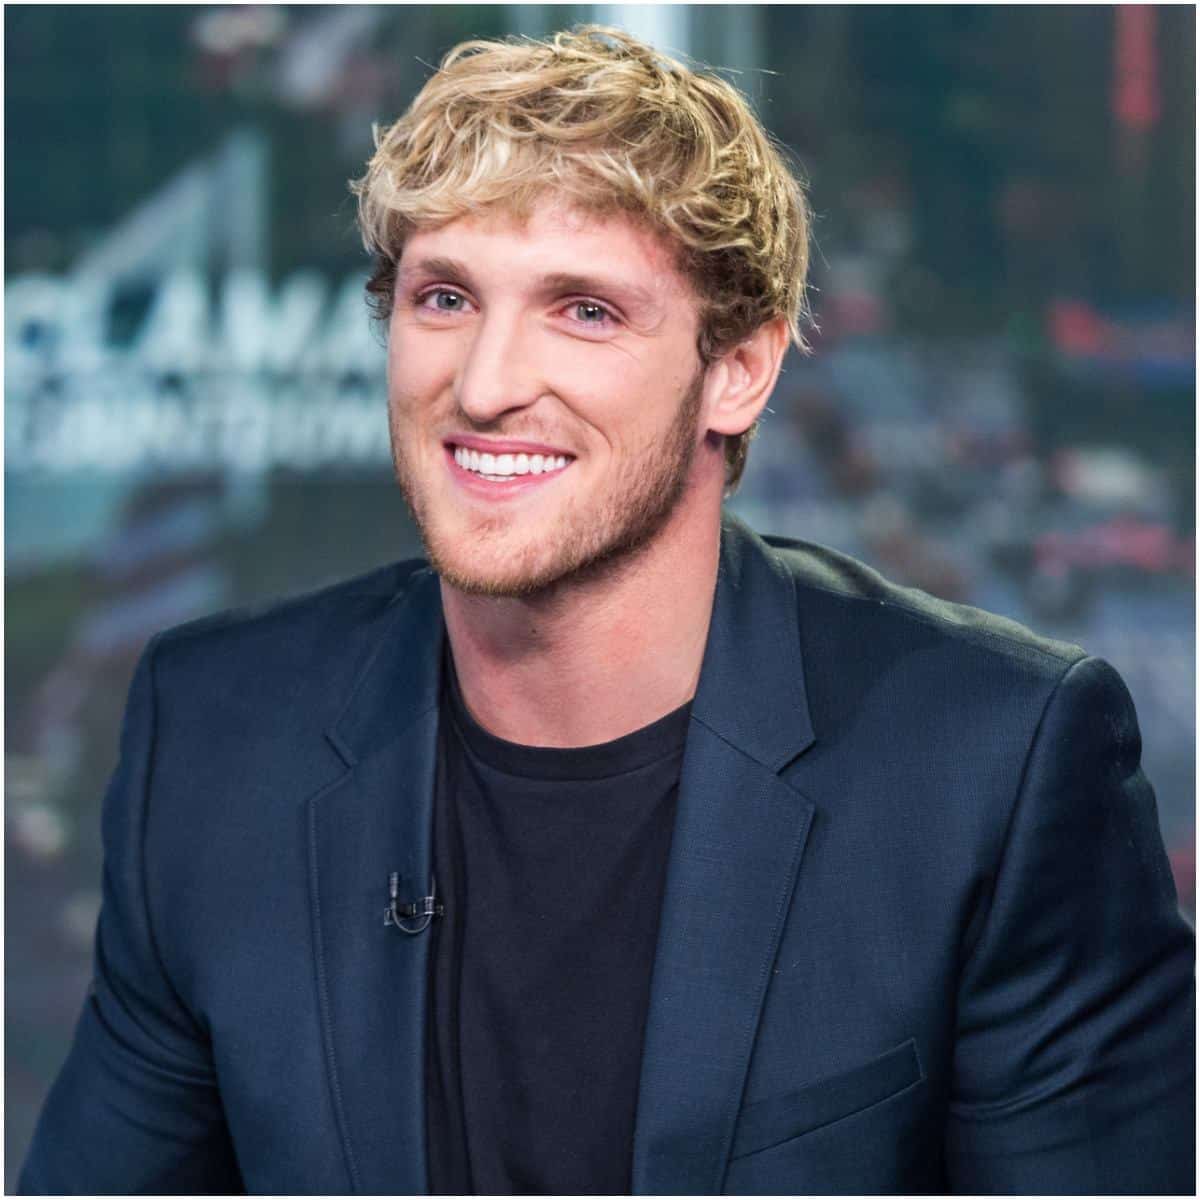 is logan paul really color blind